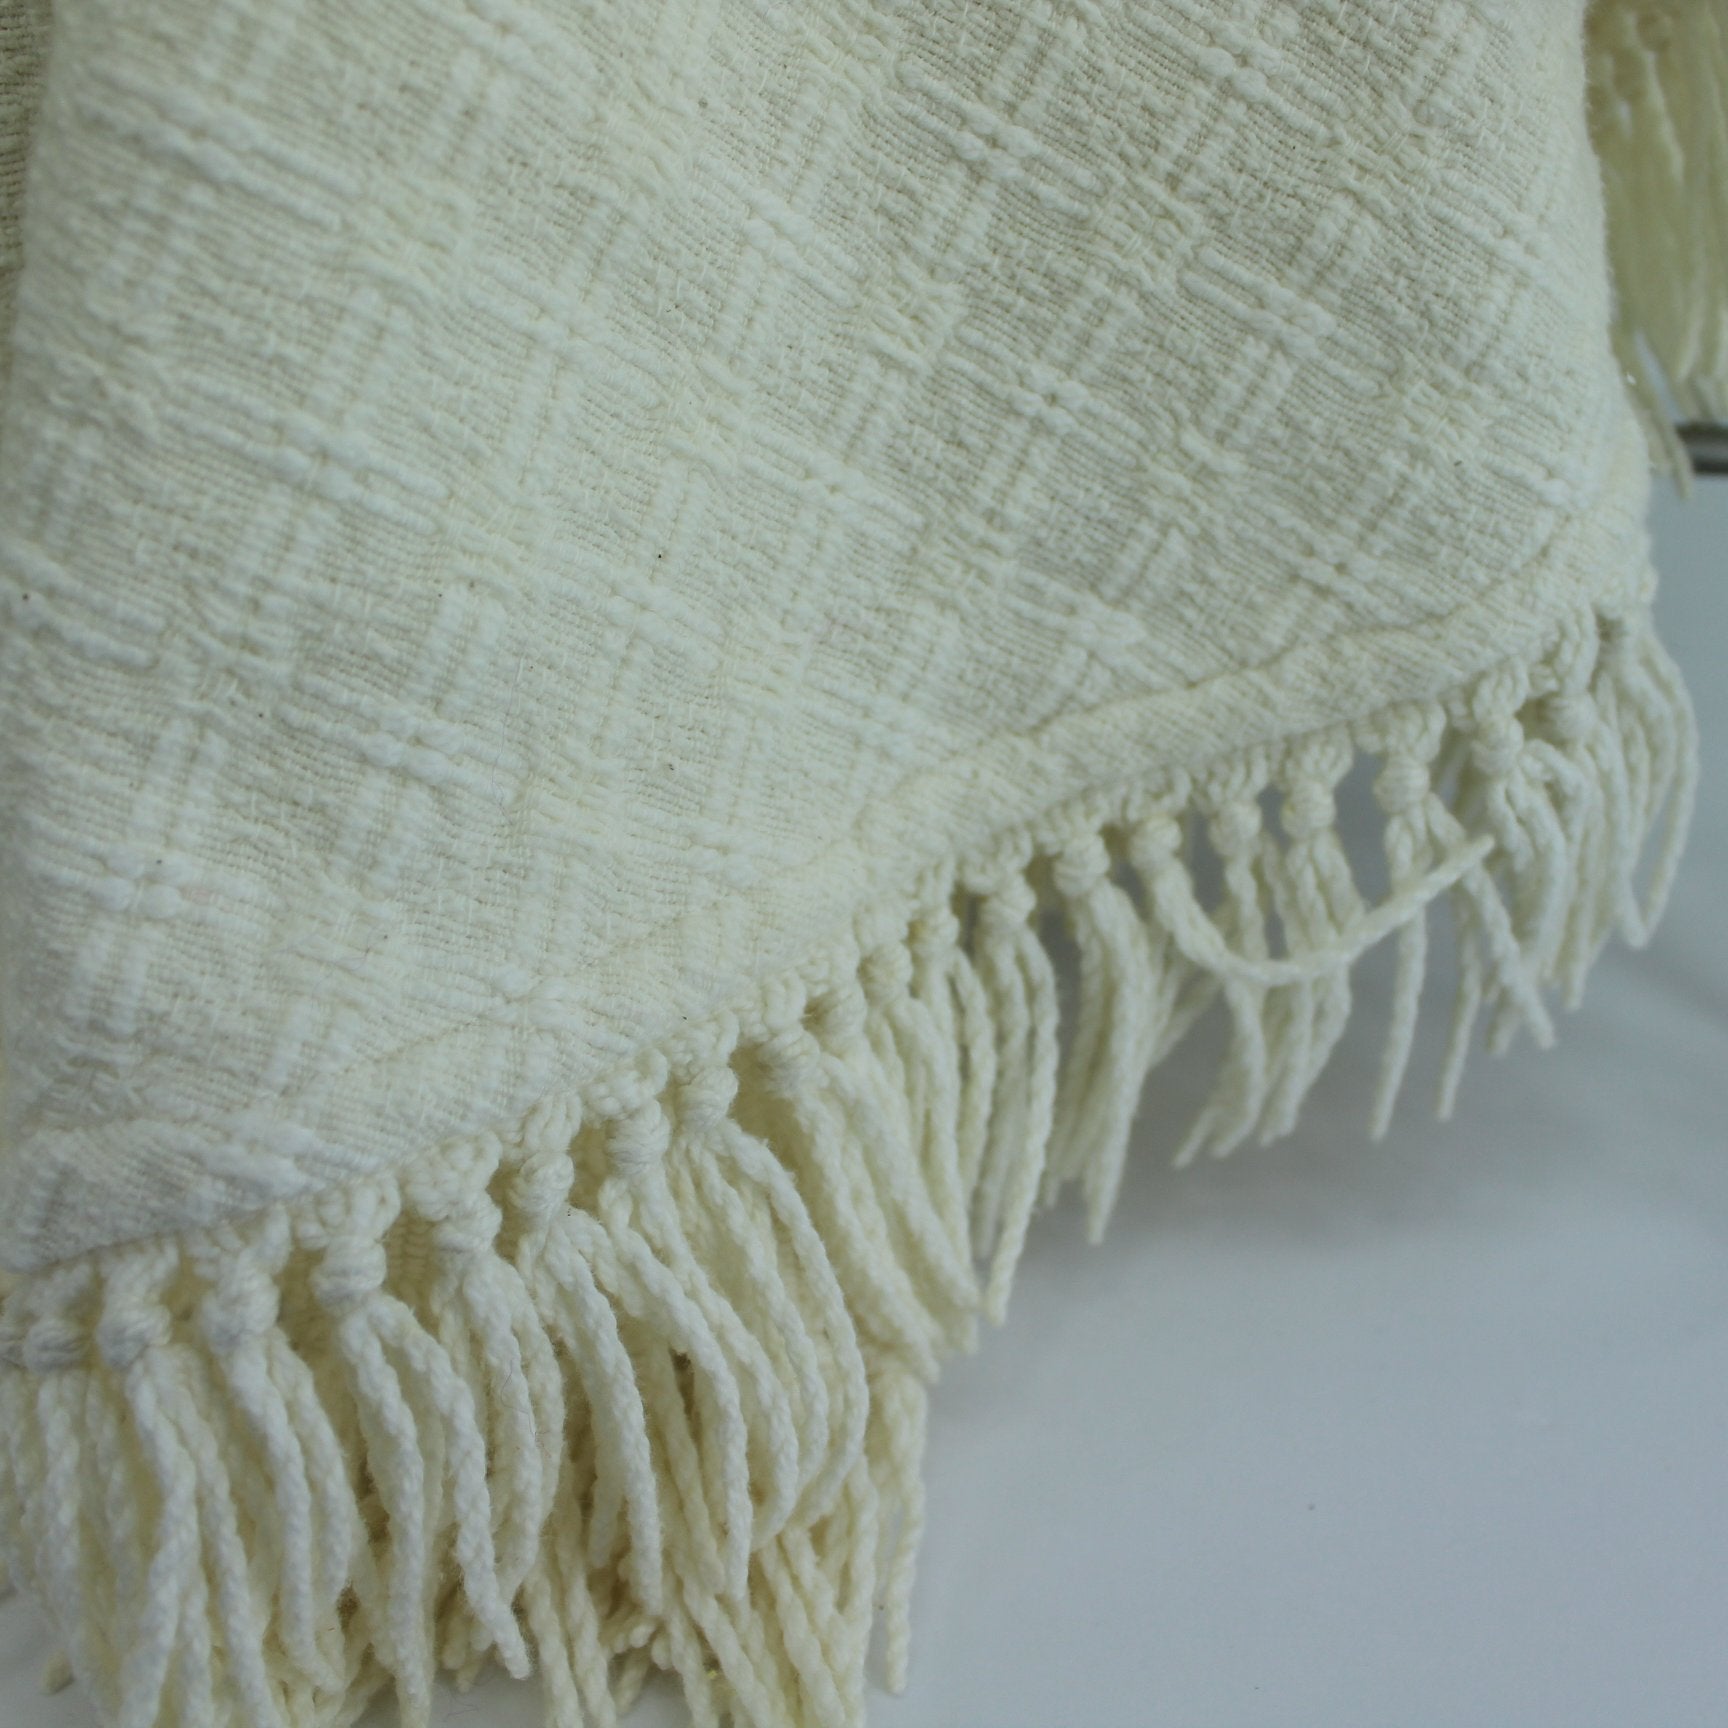 Woven Cotton Bedspread Off White Ivory Basket Weave Design closeup of fringed edge